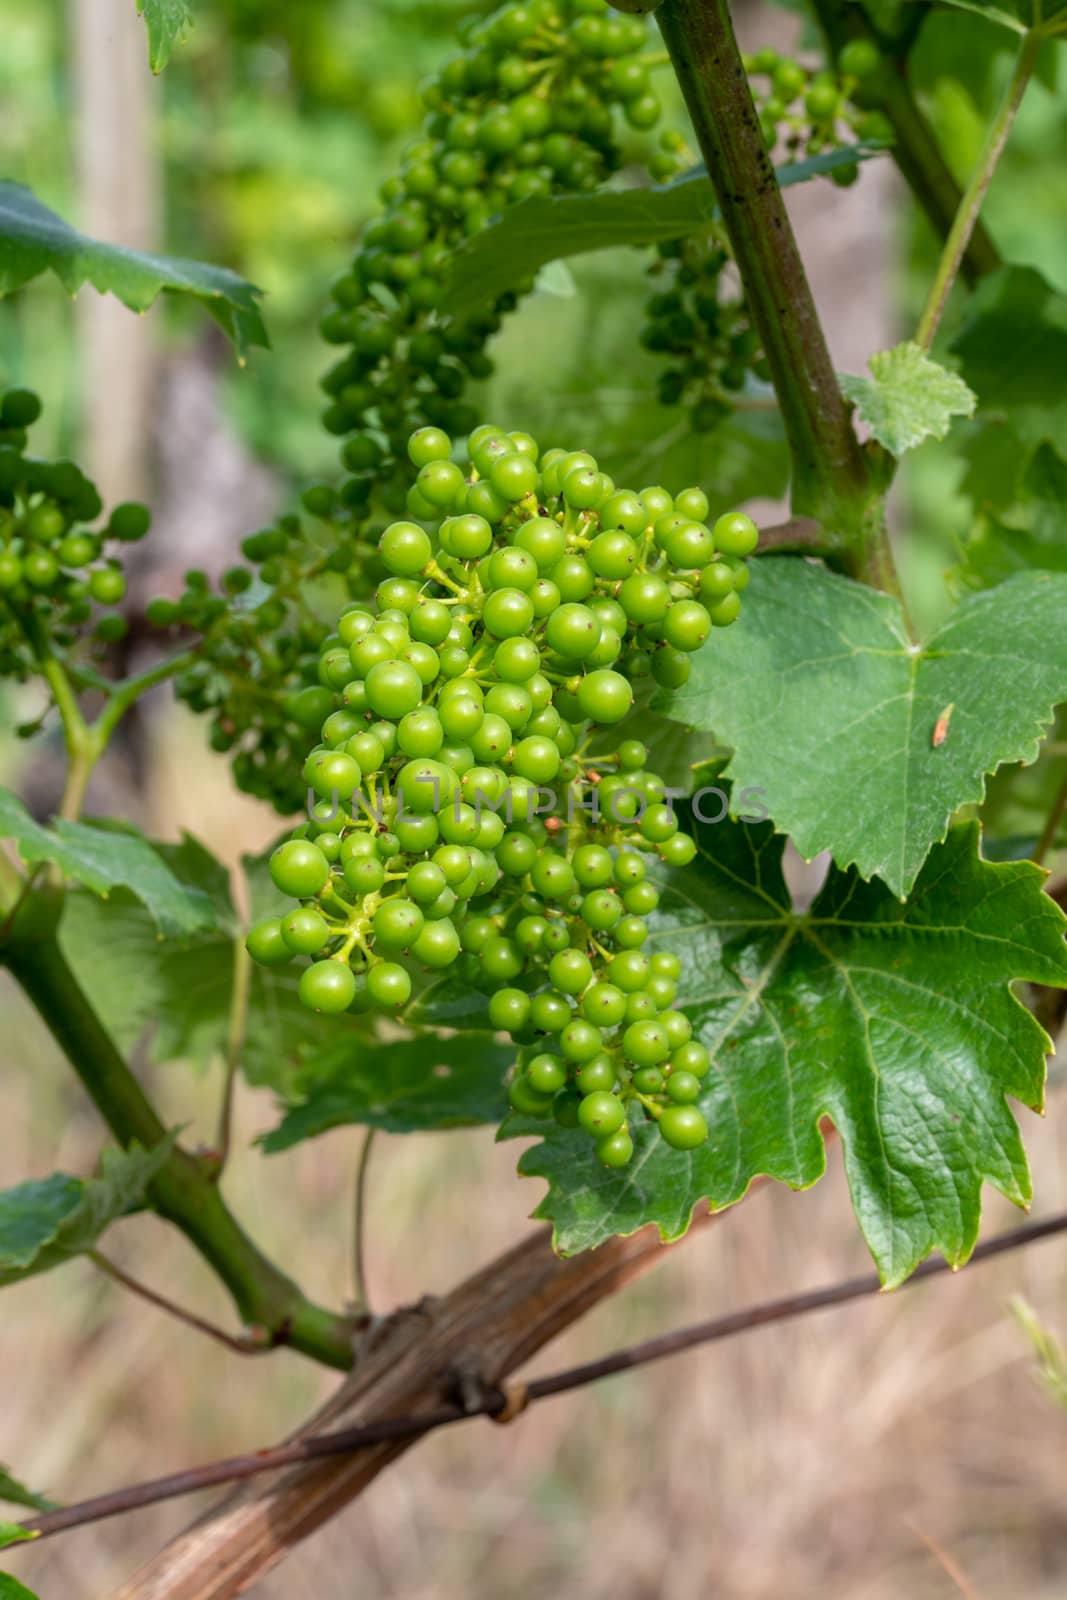 Green, unripe, young wine grapes in vineyard, early summer, close-up by asafaric